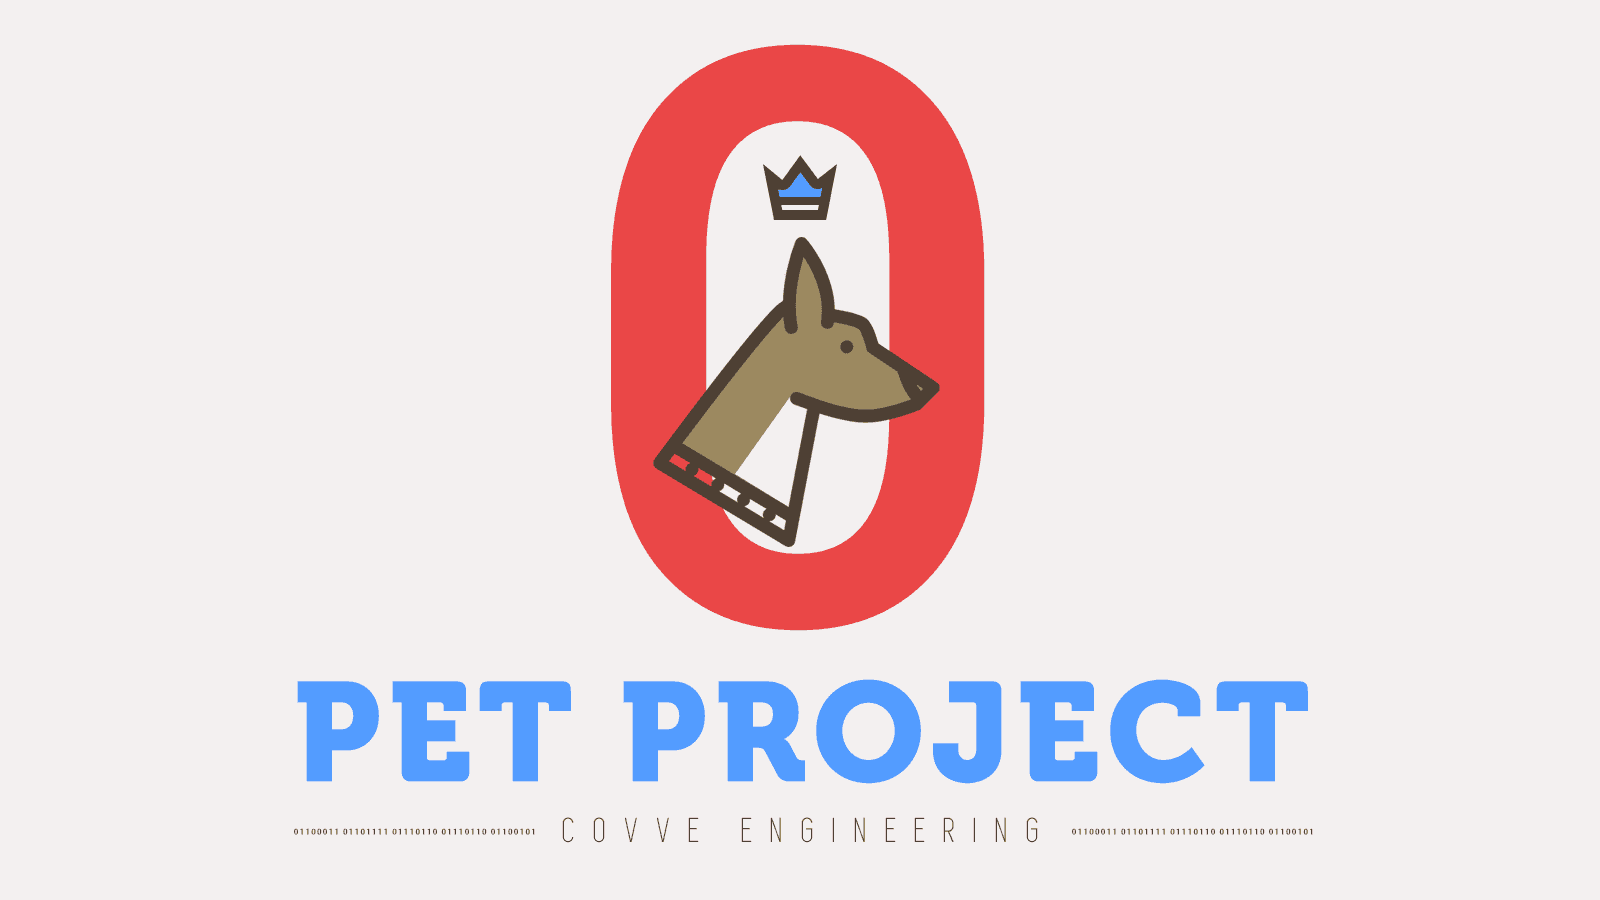 Pet project day - April 17 - Watson, event sourcing and cross platform dev ops